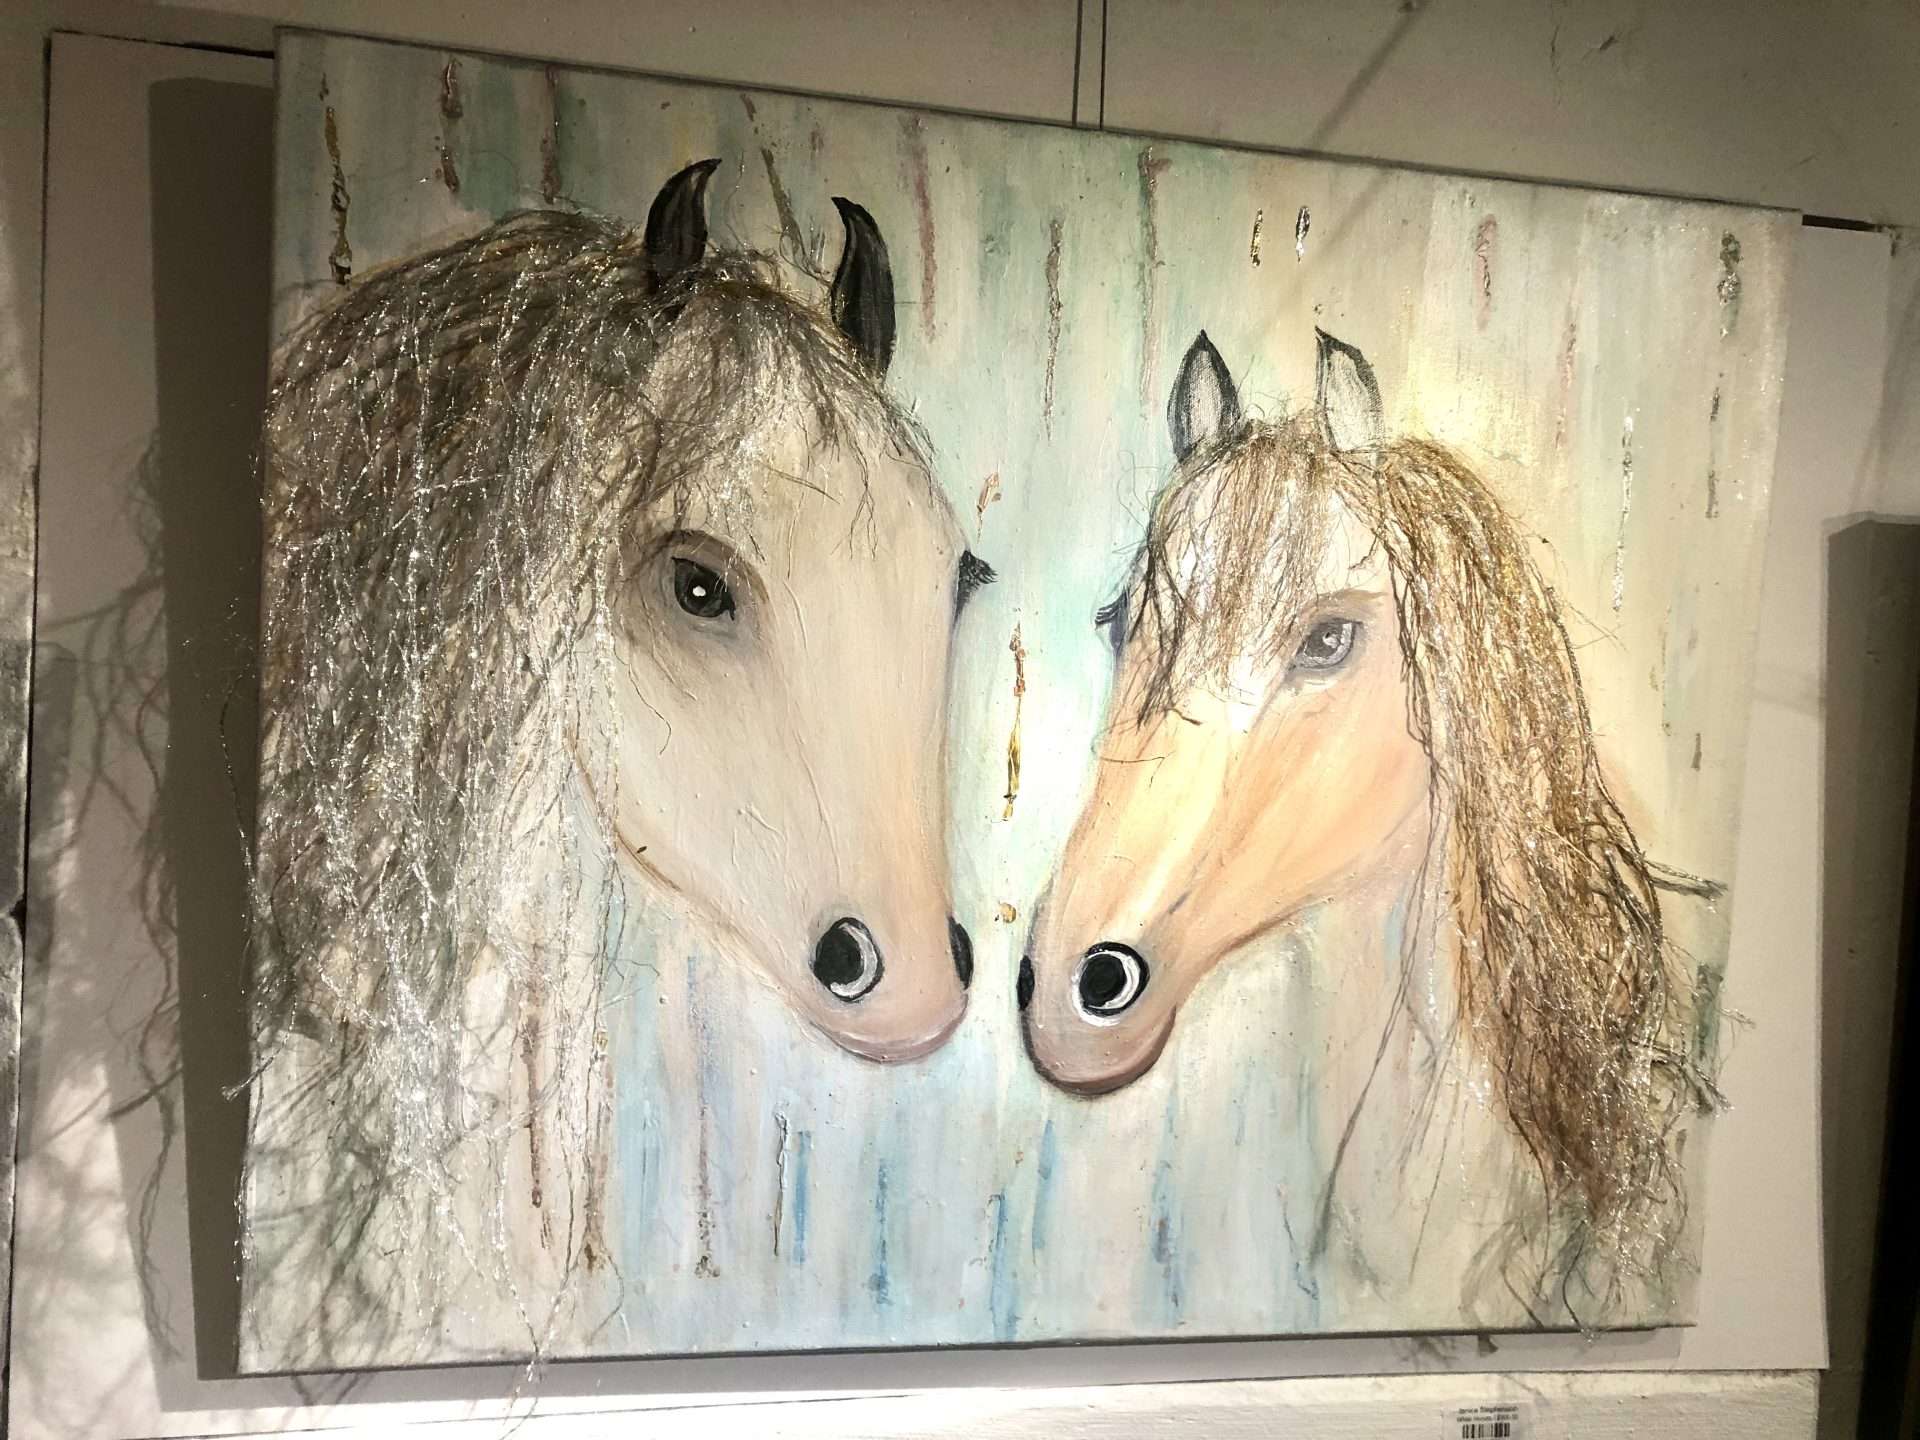 A painting showing two horses facing each other with fuzzy manes